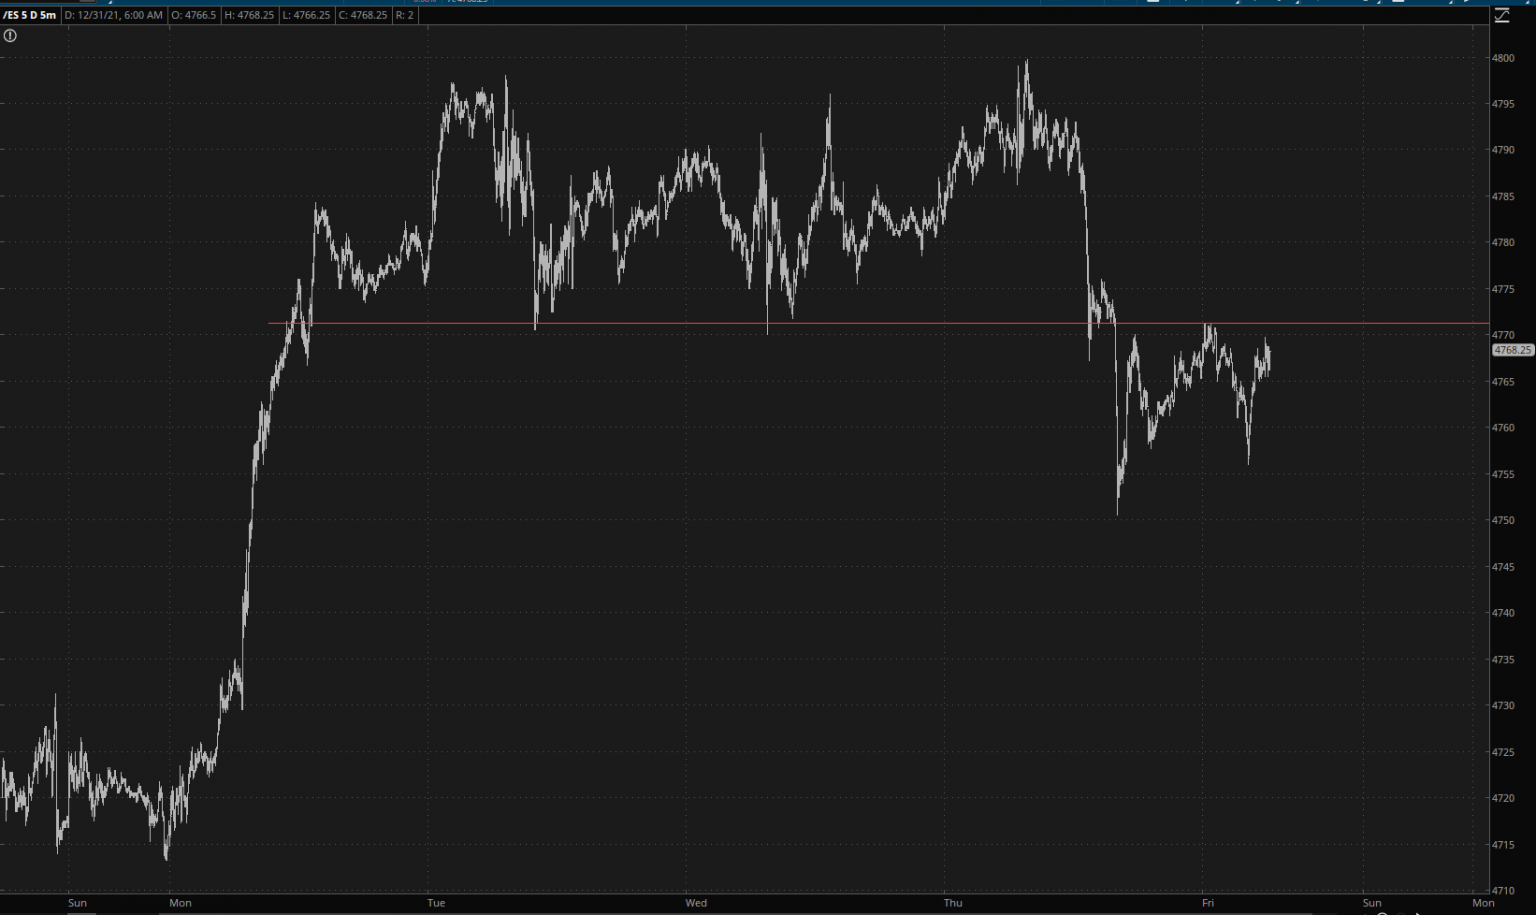 S&P 500 Futures Minute Chart.